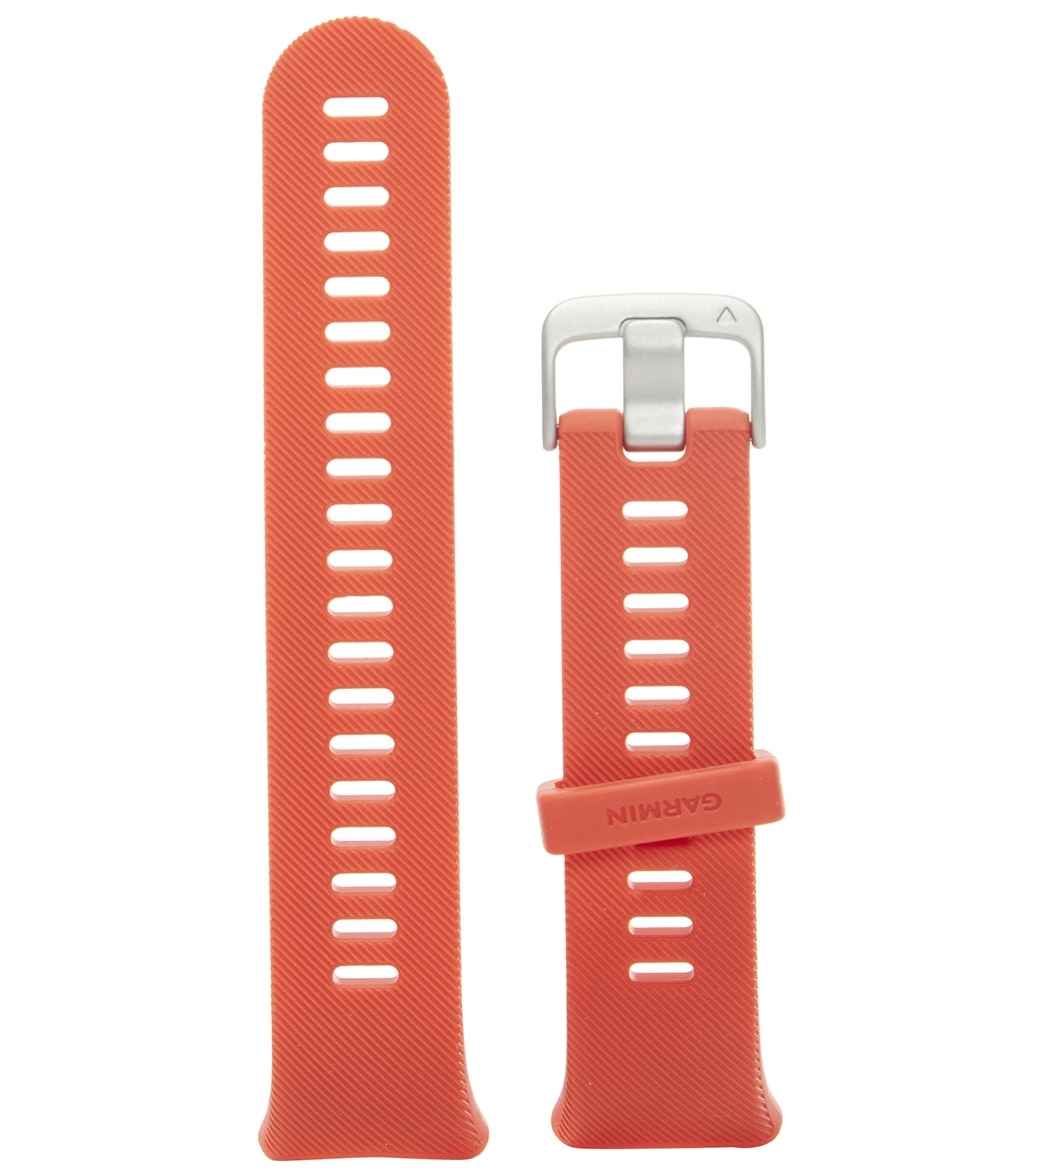 Garmin Forerunner 45 Accessory Band Only - Lava Red - Swimoutlet.com